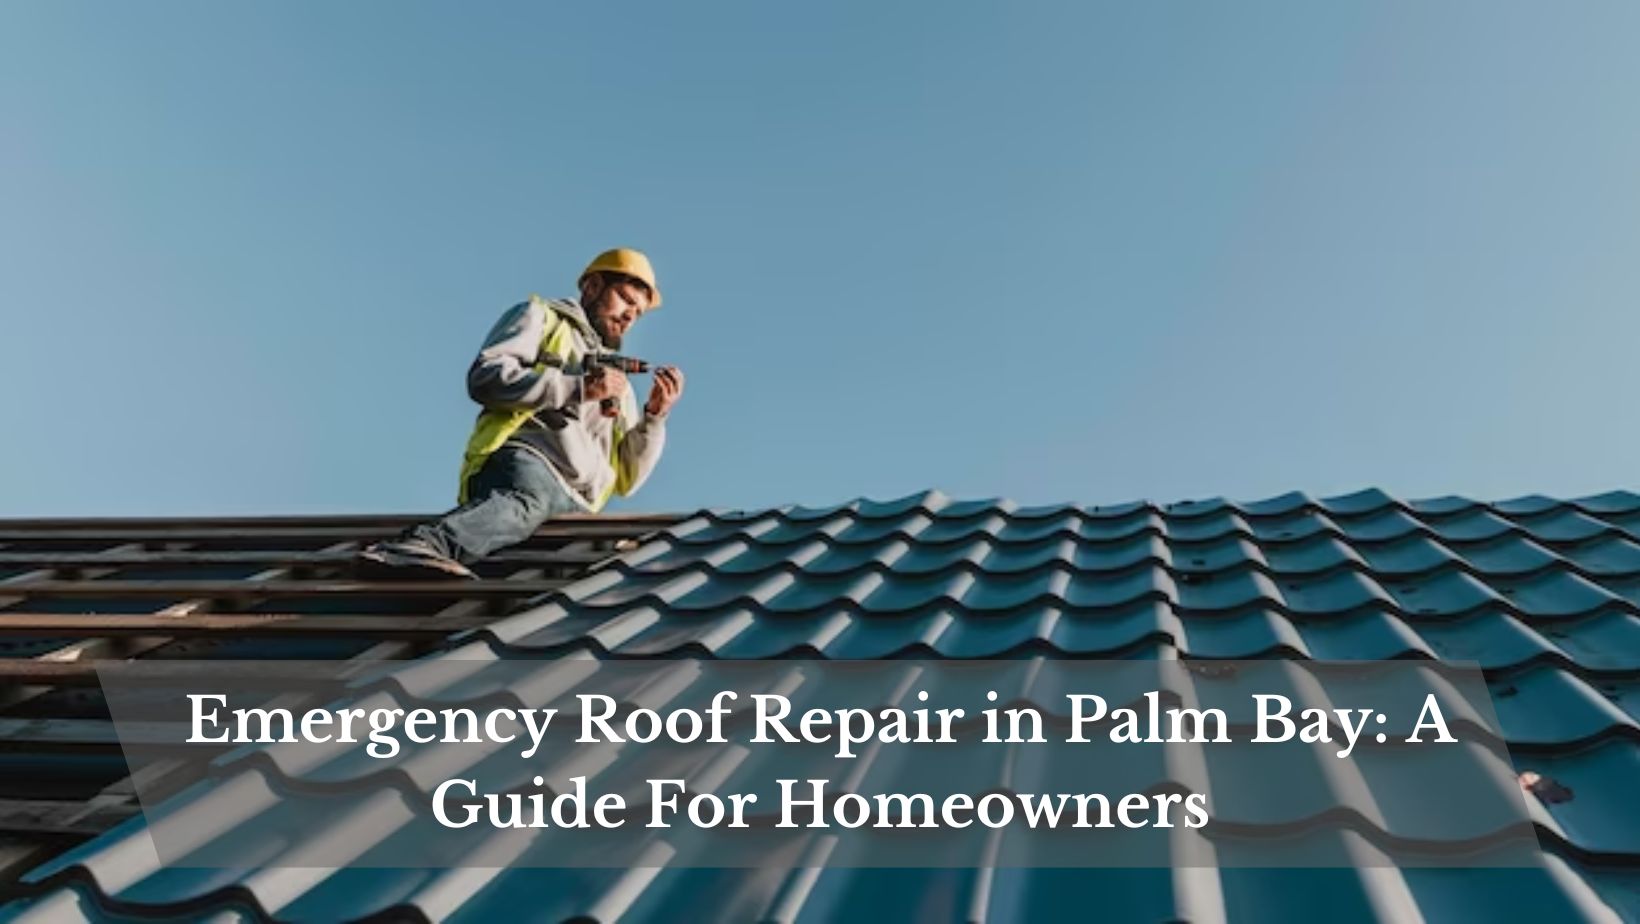 Emergency Roof Repair in Palm Bay: A Guide For Homeowners